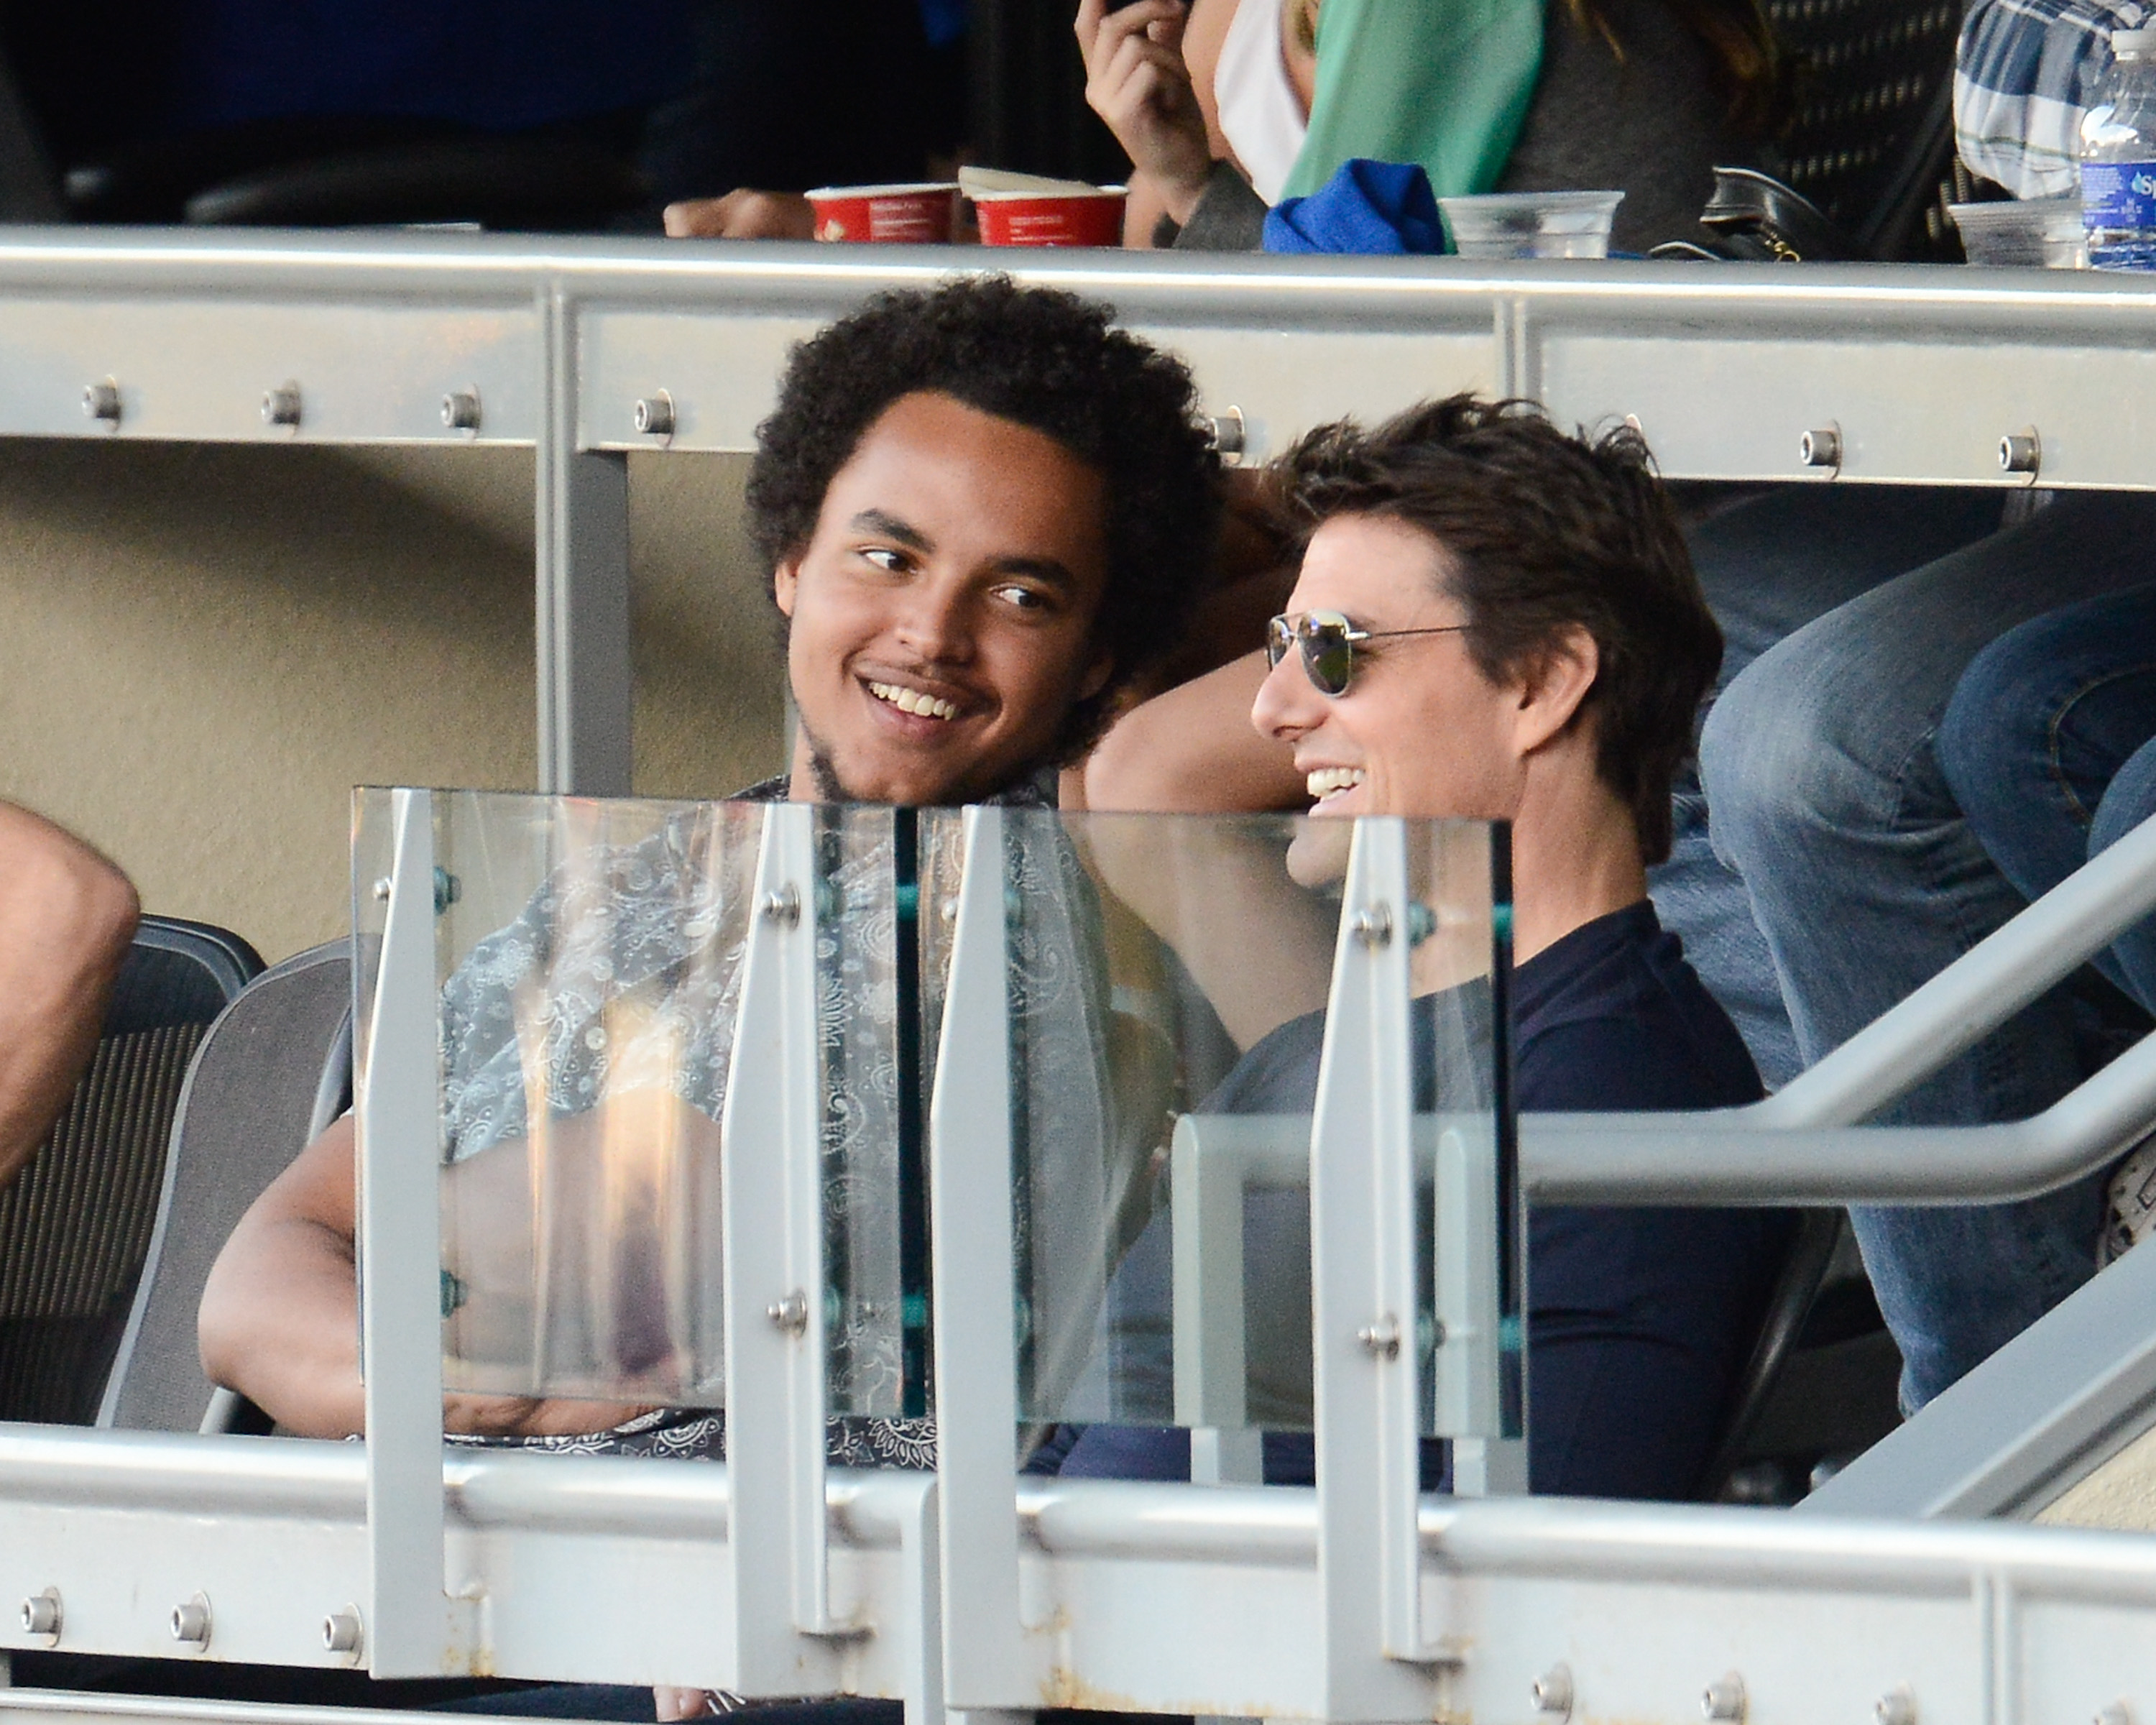 Connor and Tom Cruise at the National League Championship Series at Dodger Stadium in October 2013. | Source: Getty Images